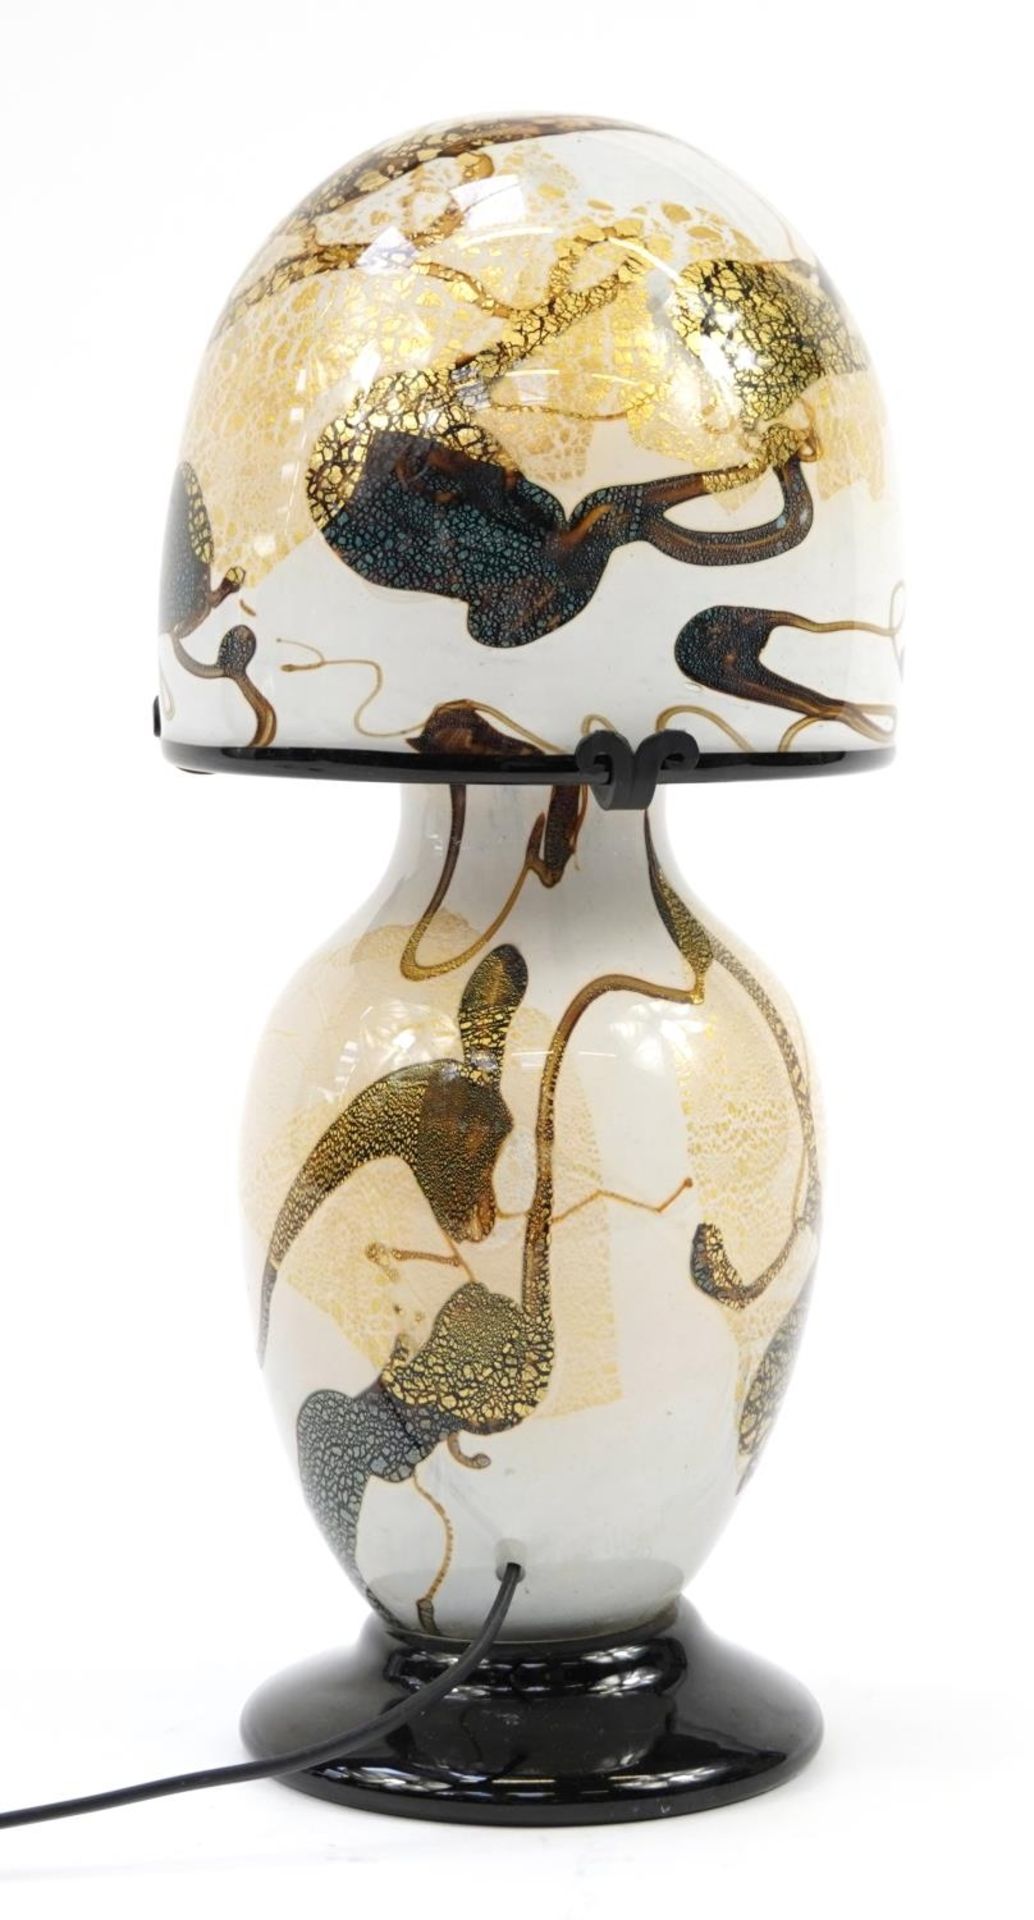 Jean Michel Operto art glass table lamp with shade, 41cm high - Image 2 of 3